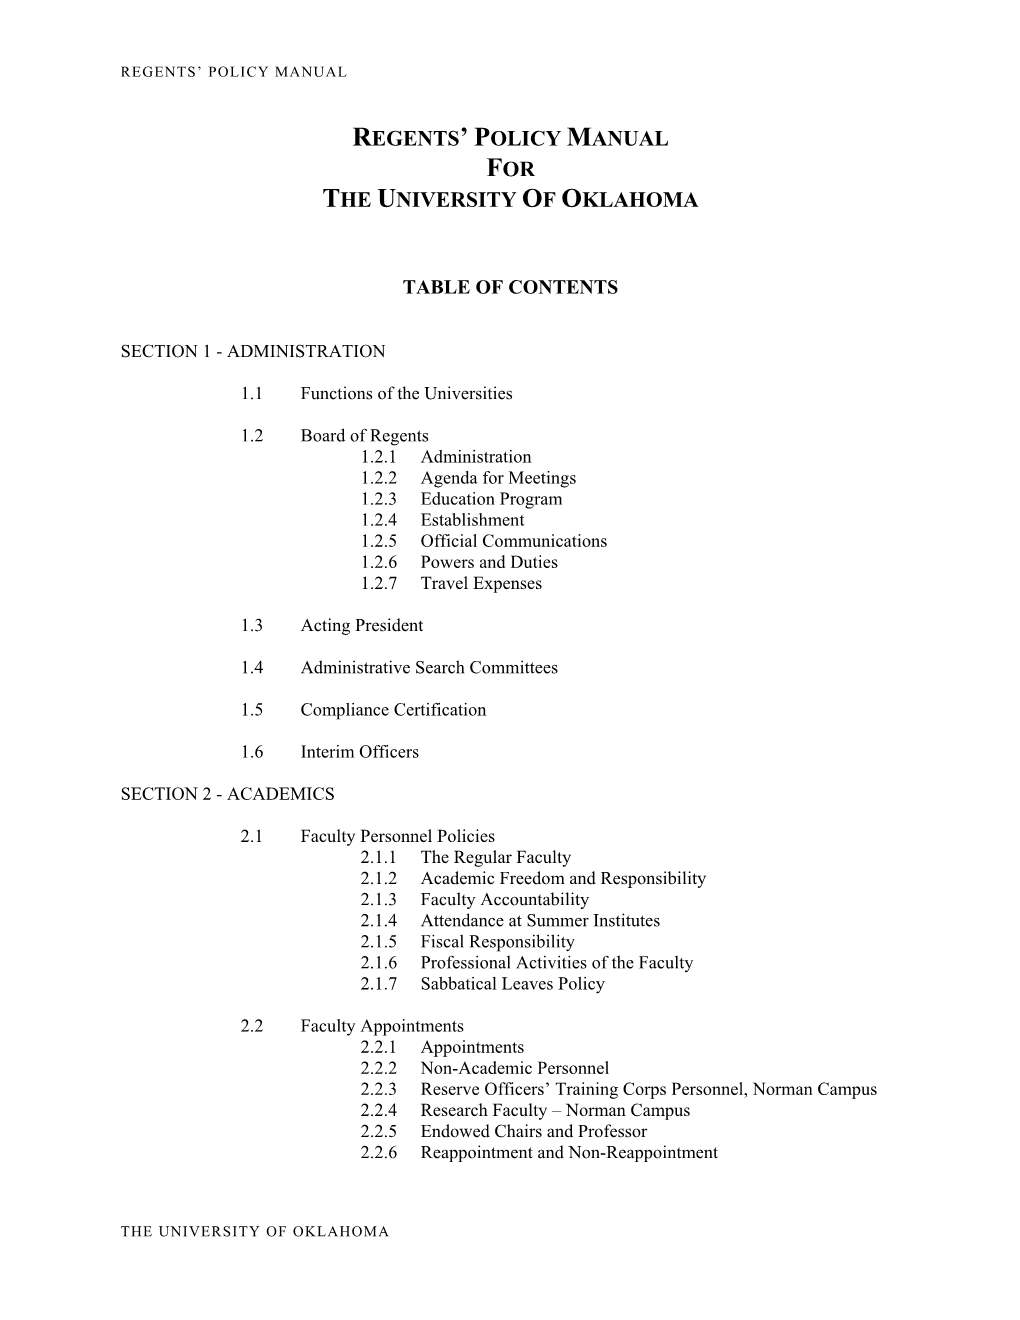 Regents' Policy Manual for the University of Oklahoma